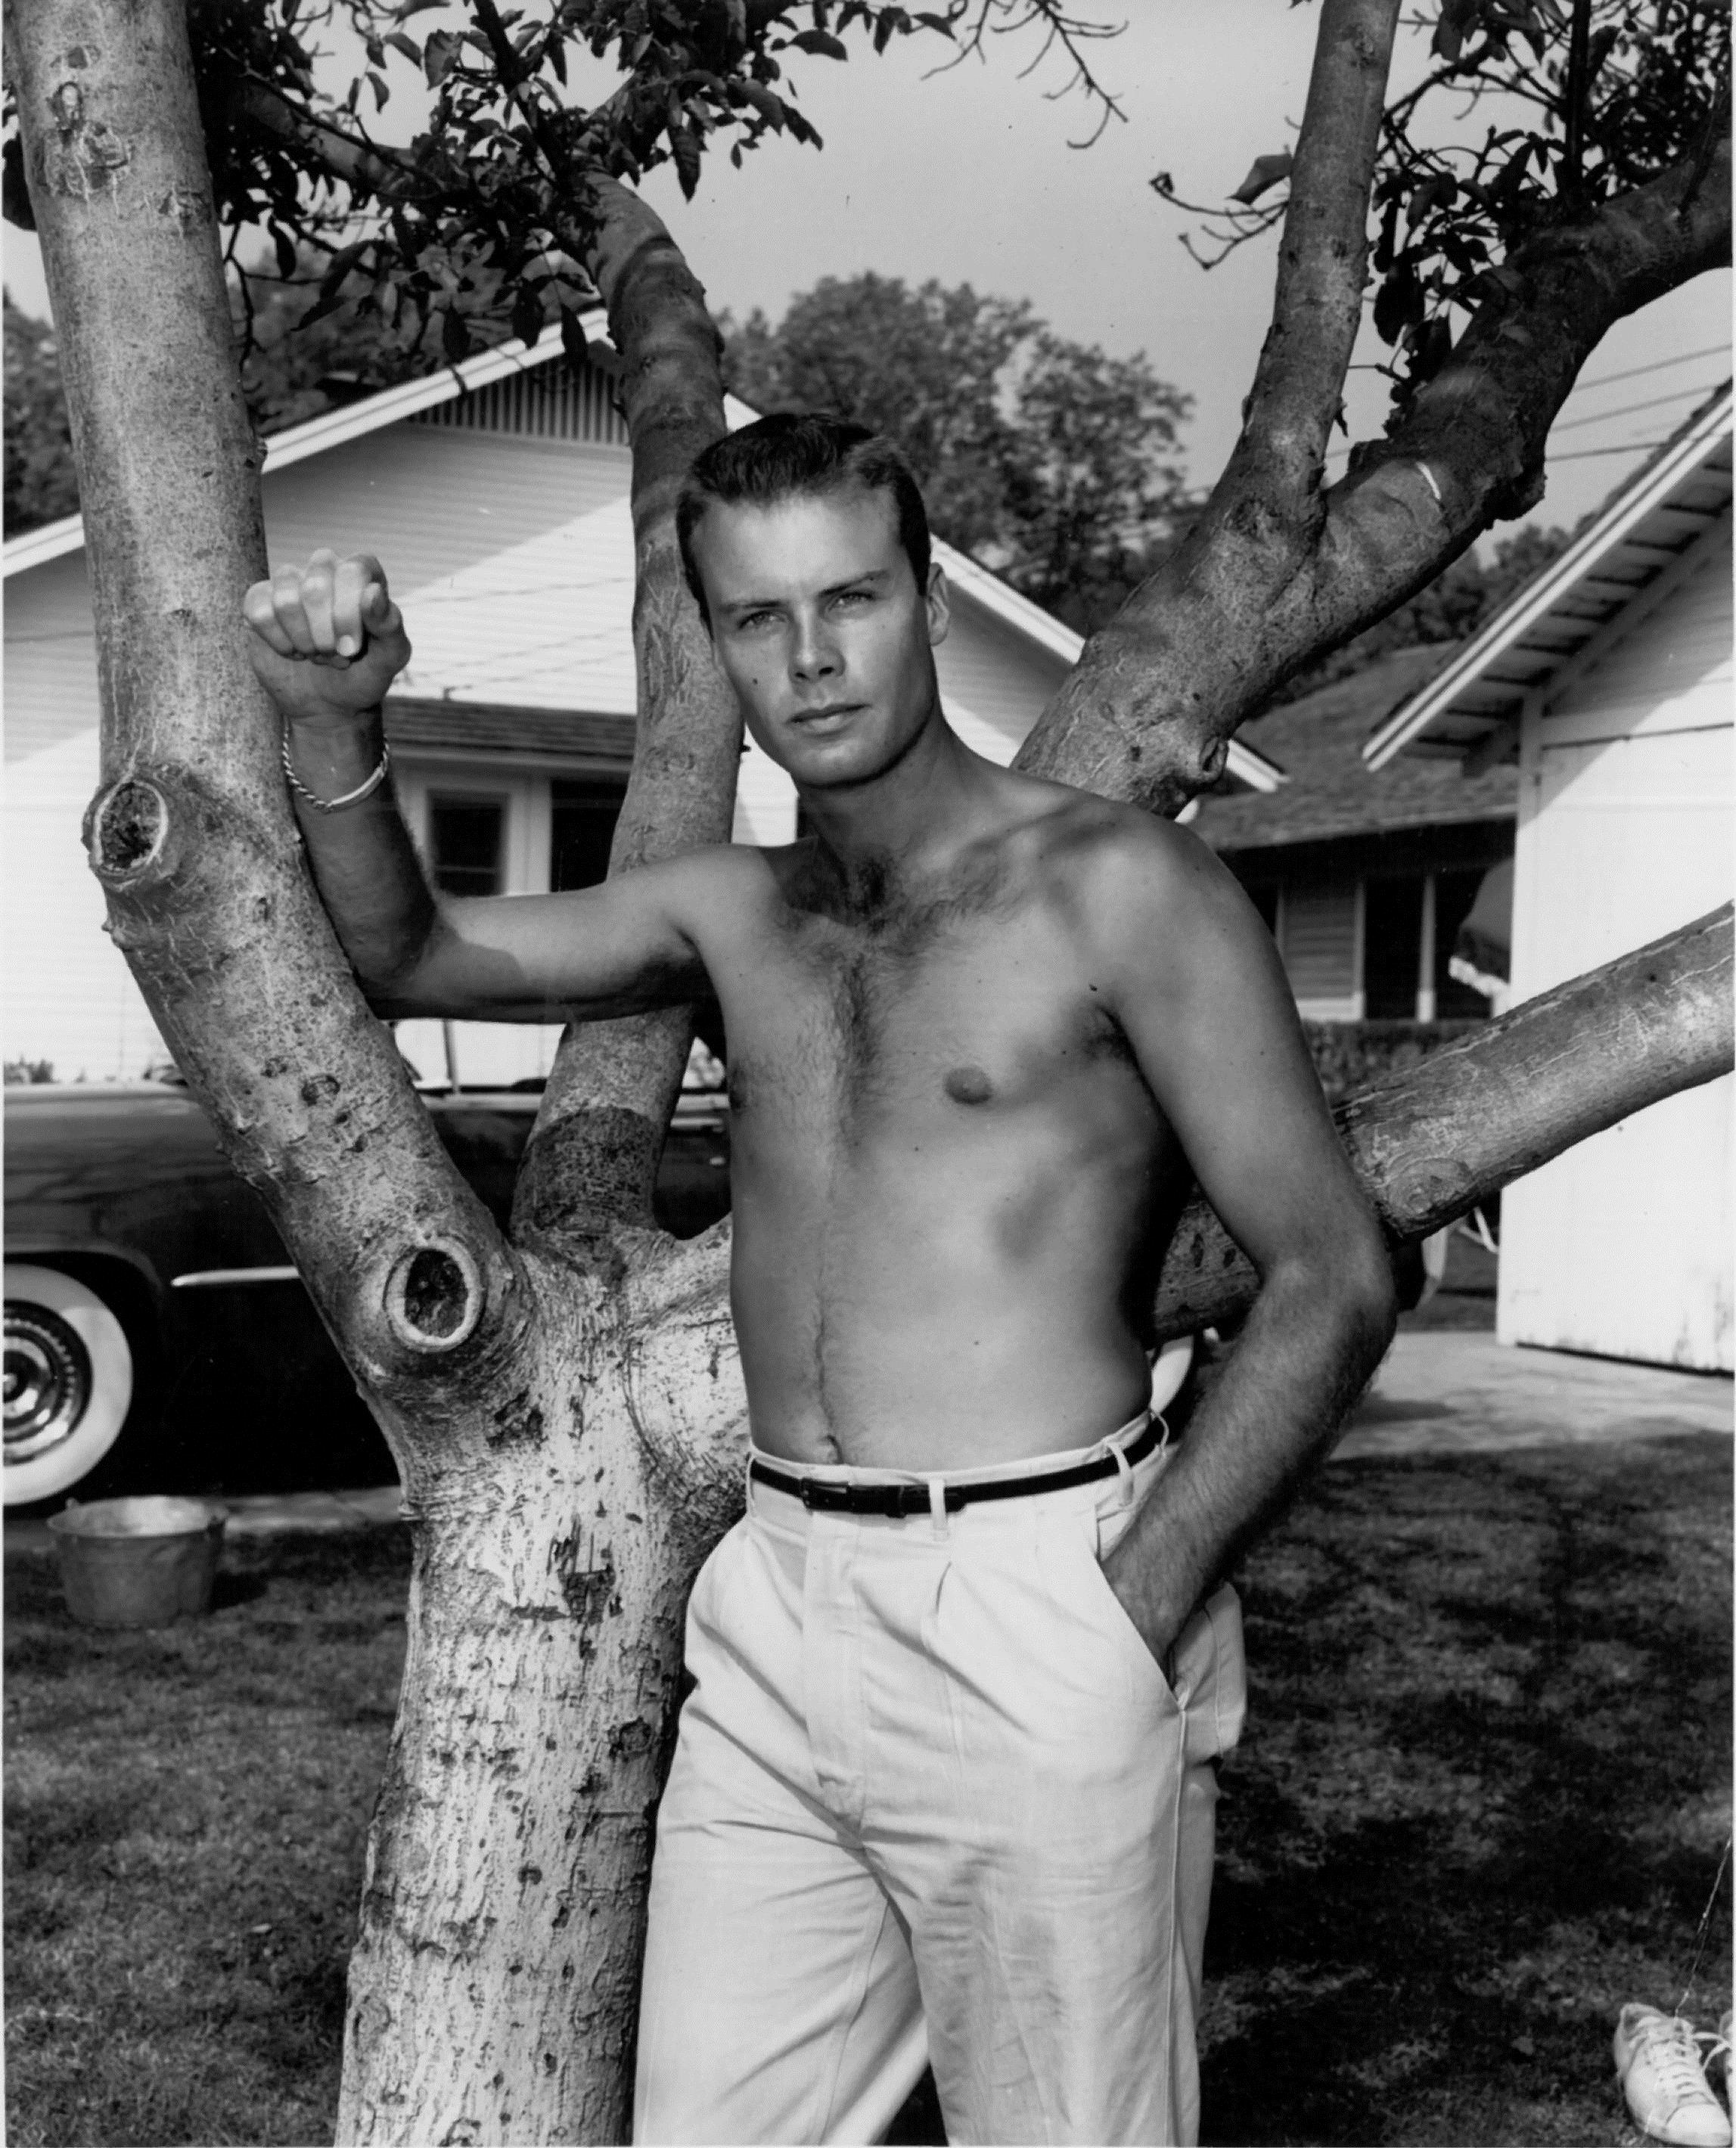  212, backyard. This early “beefcake” photo appeared in “Sigh Guy,”  Movies , Aug. 1954, c. 1953, before or after  The Caine Mutiny  shooting. In the background is Bob’s red Lincoln. Another photo in the same story shows Bob washing the whitewall tir